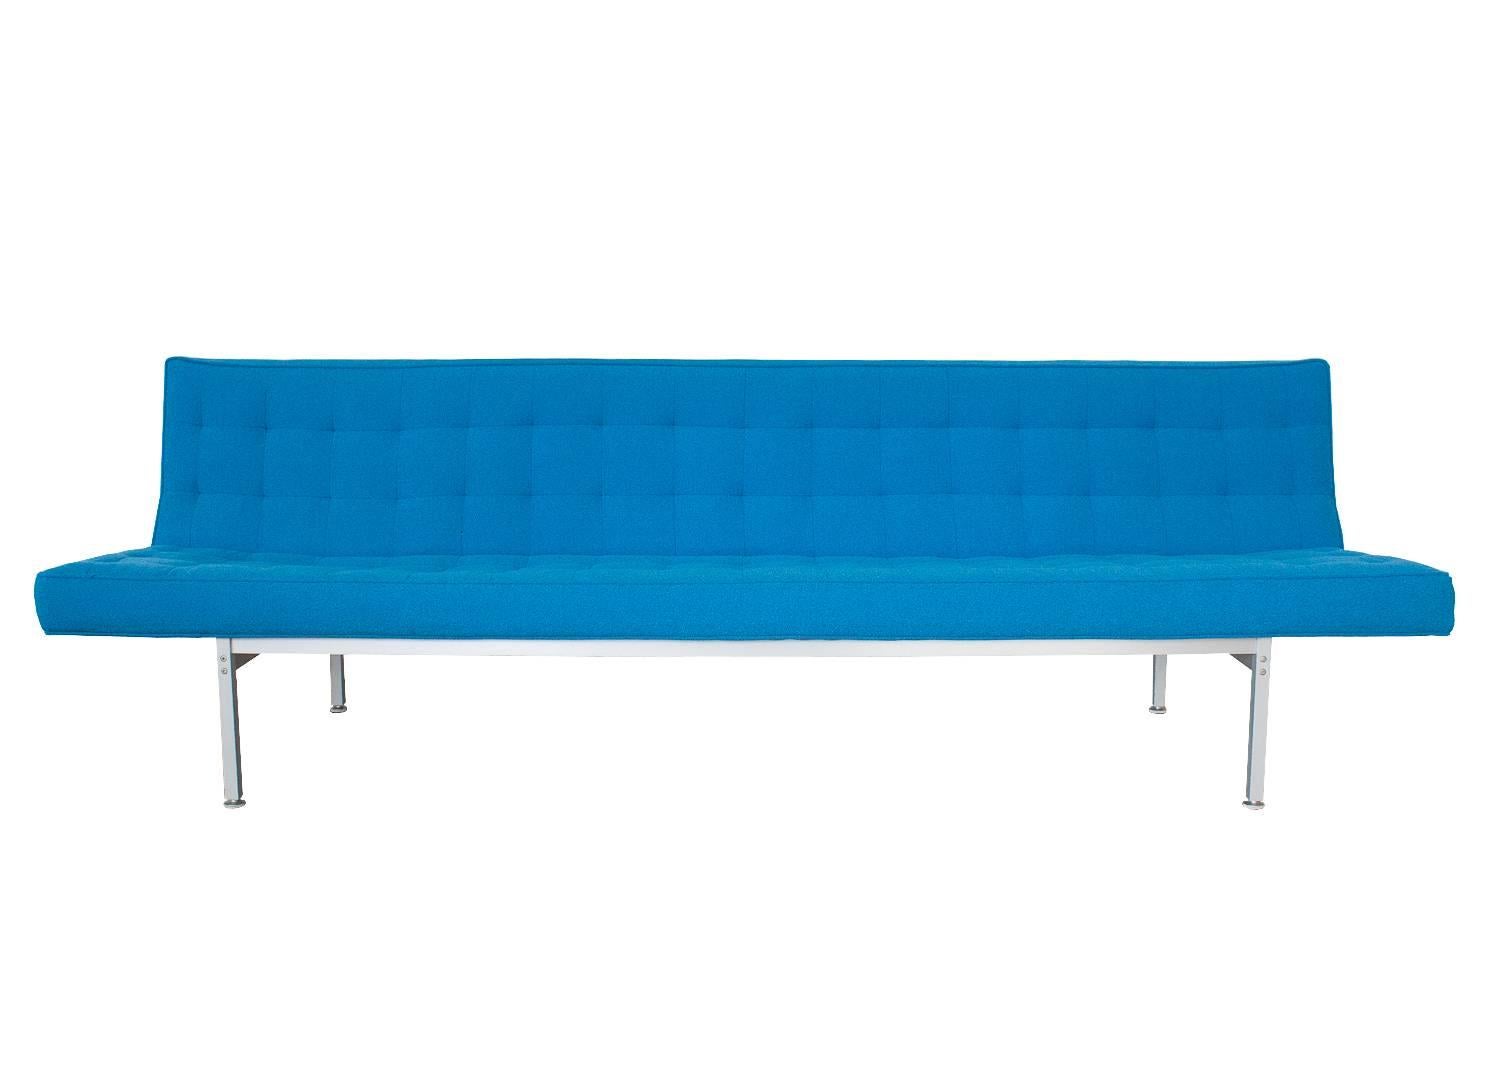 Minimal 8 foot armless sofa with exposed aluminum legs / framework. Reminiscent of Florence Knoll, Jens Risom and George Nelson. Unmarked. Upholstered in original bright marine blue woven fabric. Tufted tight seat and back. Solid aluminum frame.